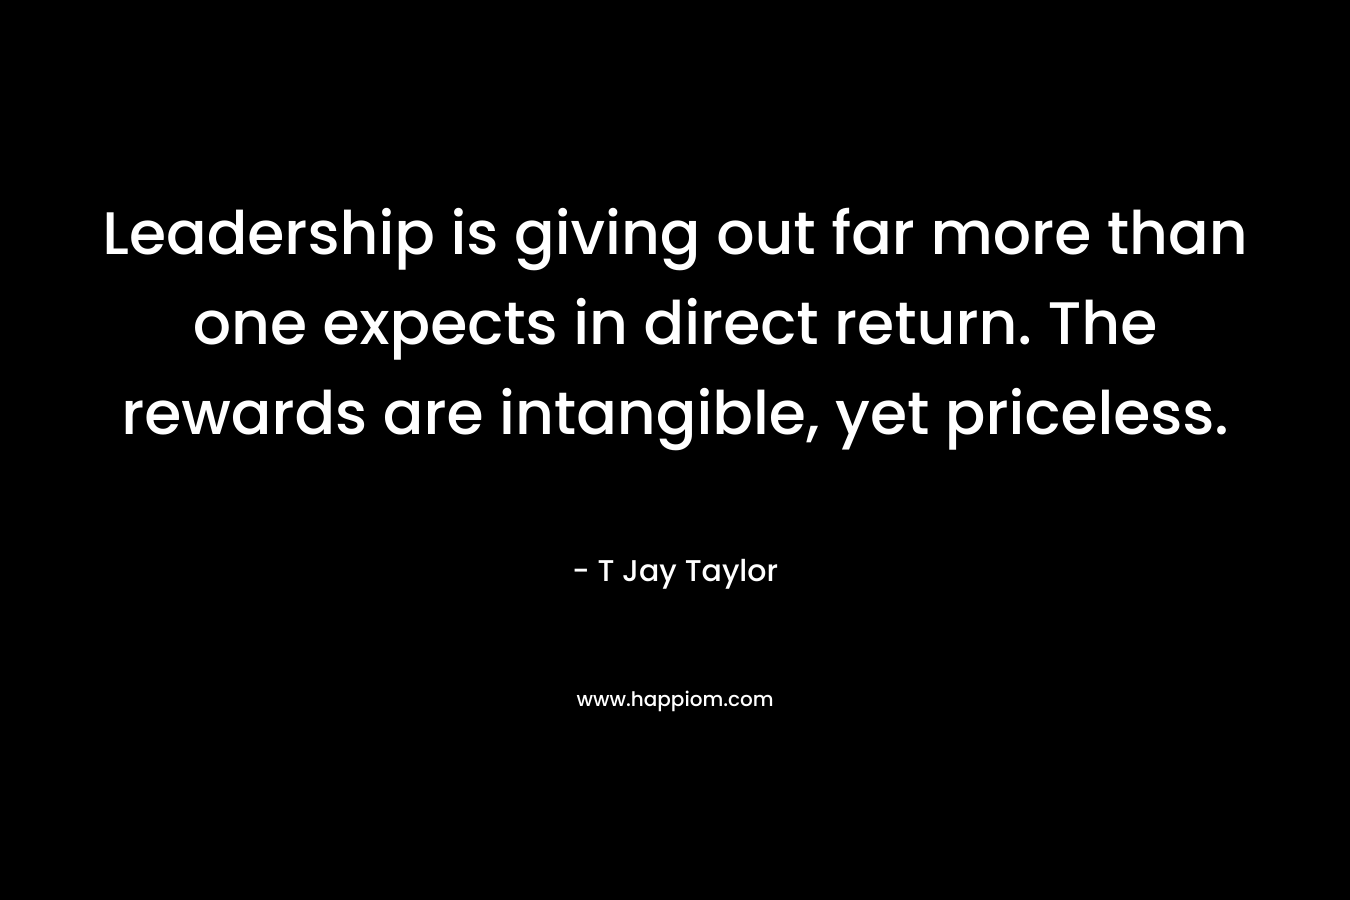 Leadership is giving out far more than one expects in direct return. The rewards are intangible, yet priceless.